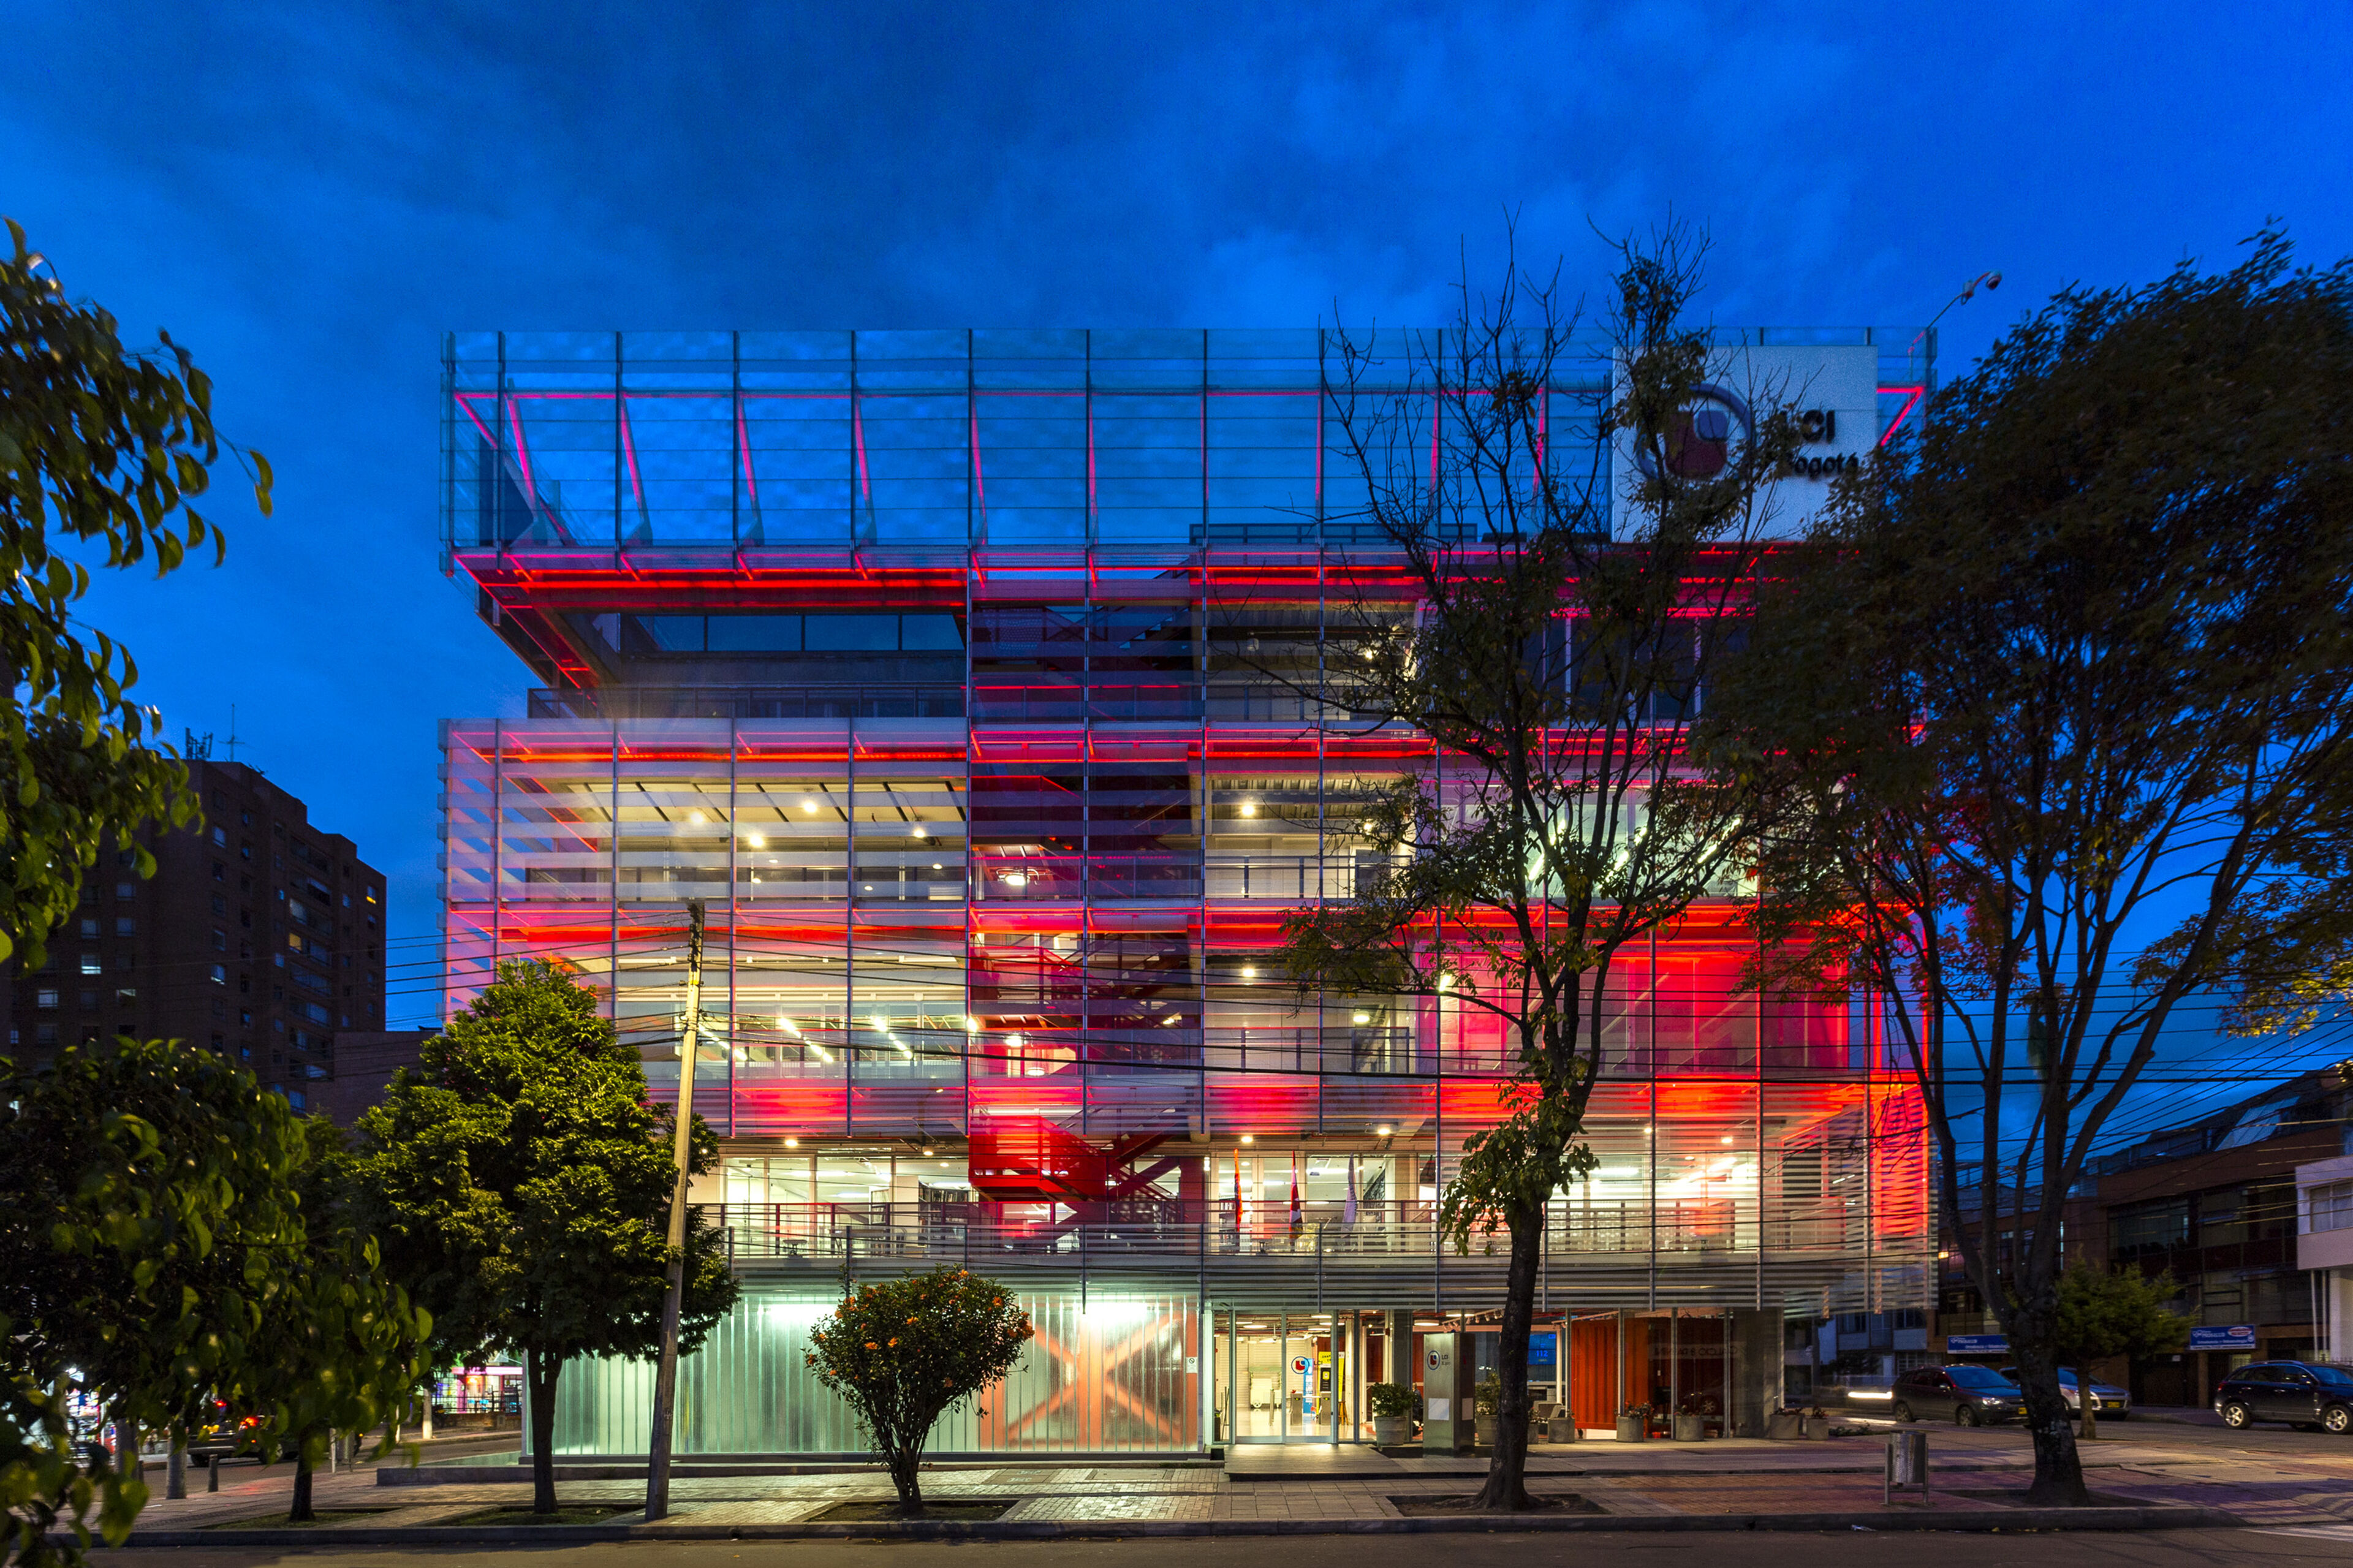 A contemporary office building illuminated with red and white lights under the evening sky, showcasing a blend of modern architecture and urban landscaping.